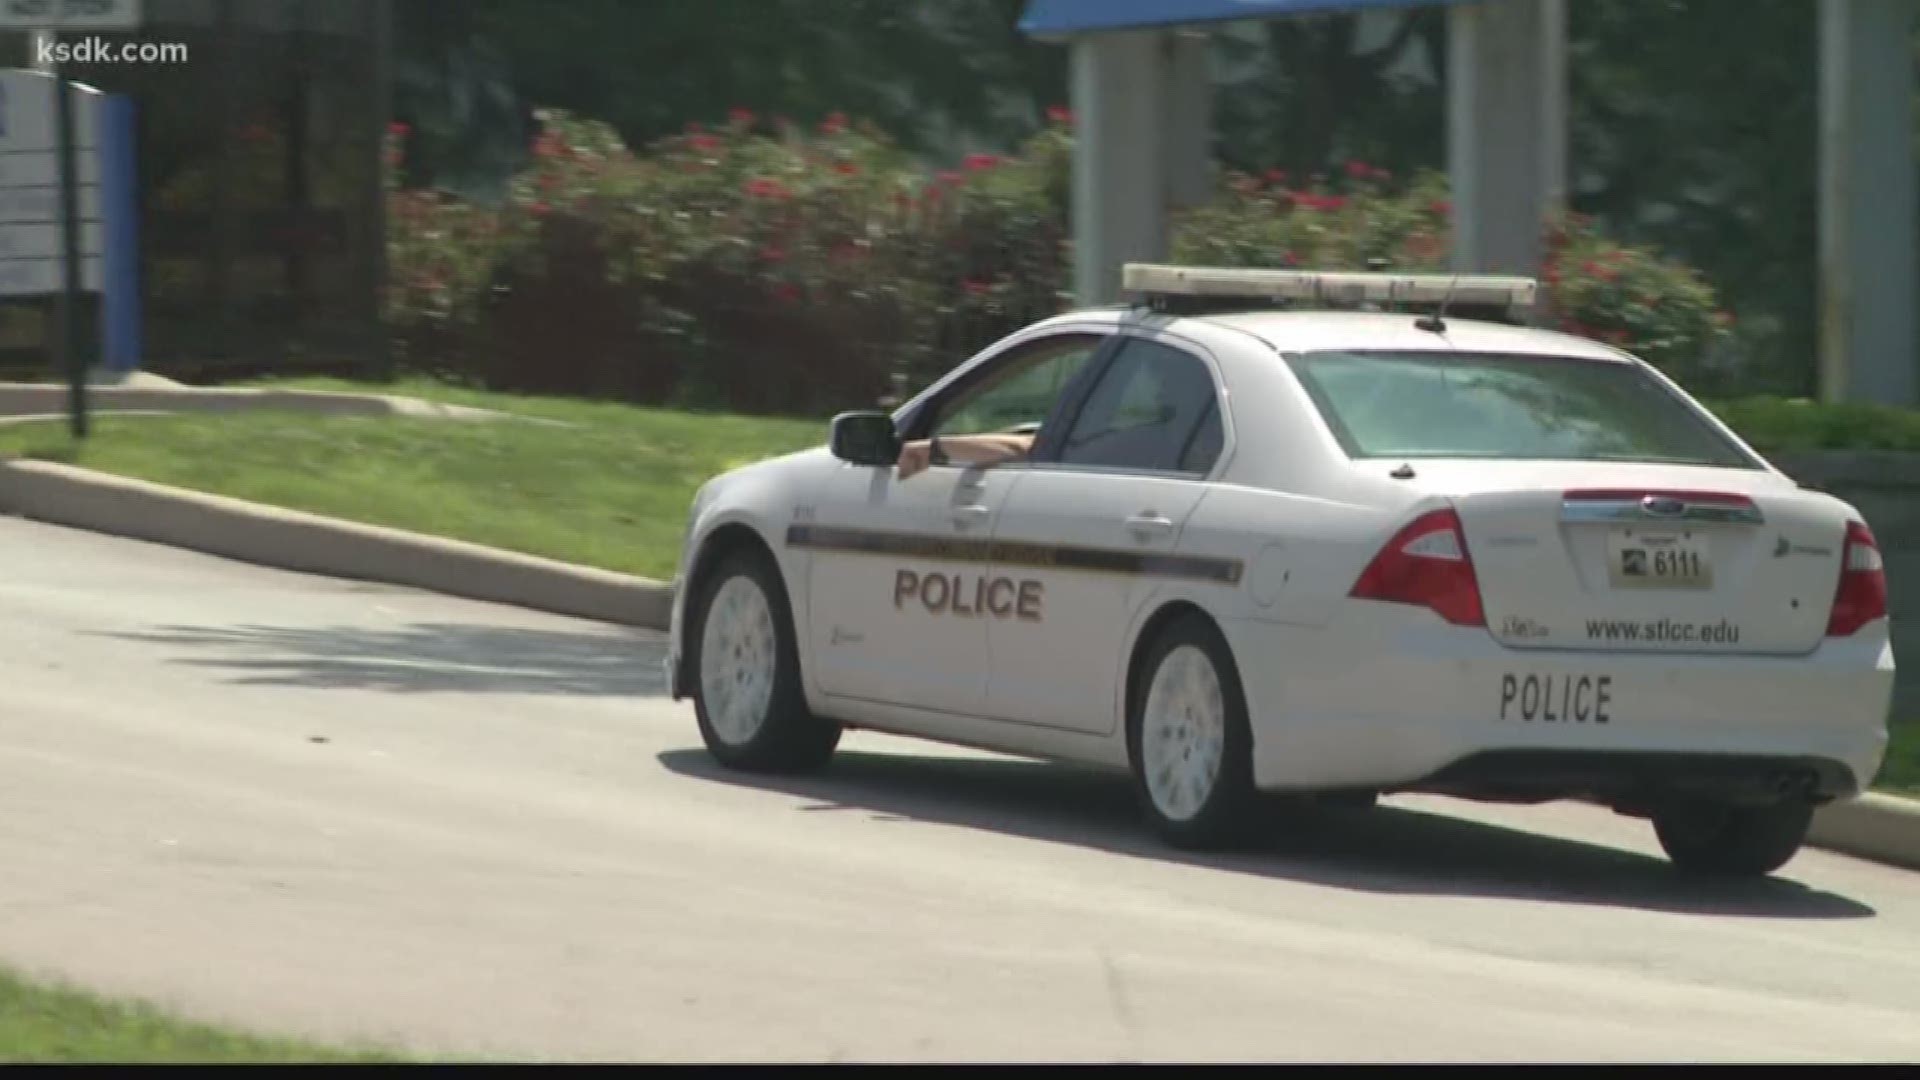 The I-Team has been looking into claims that St. Louis Community College wouldn't let campus police fuel their patrol cars.